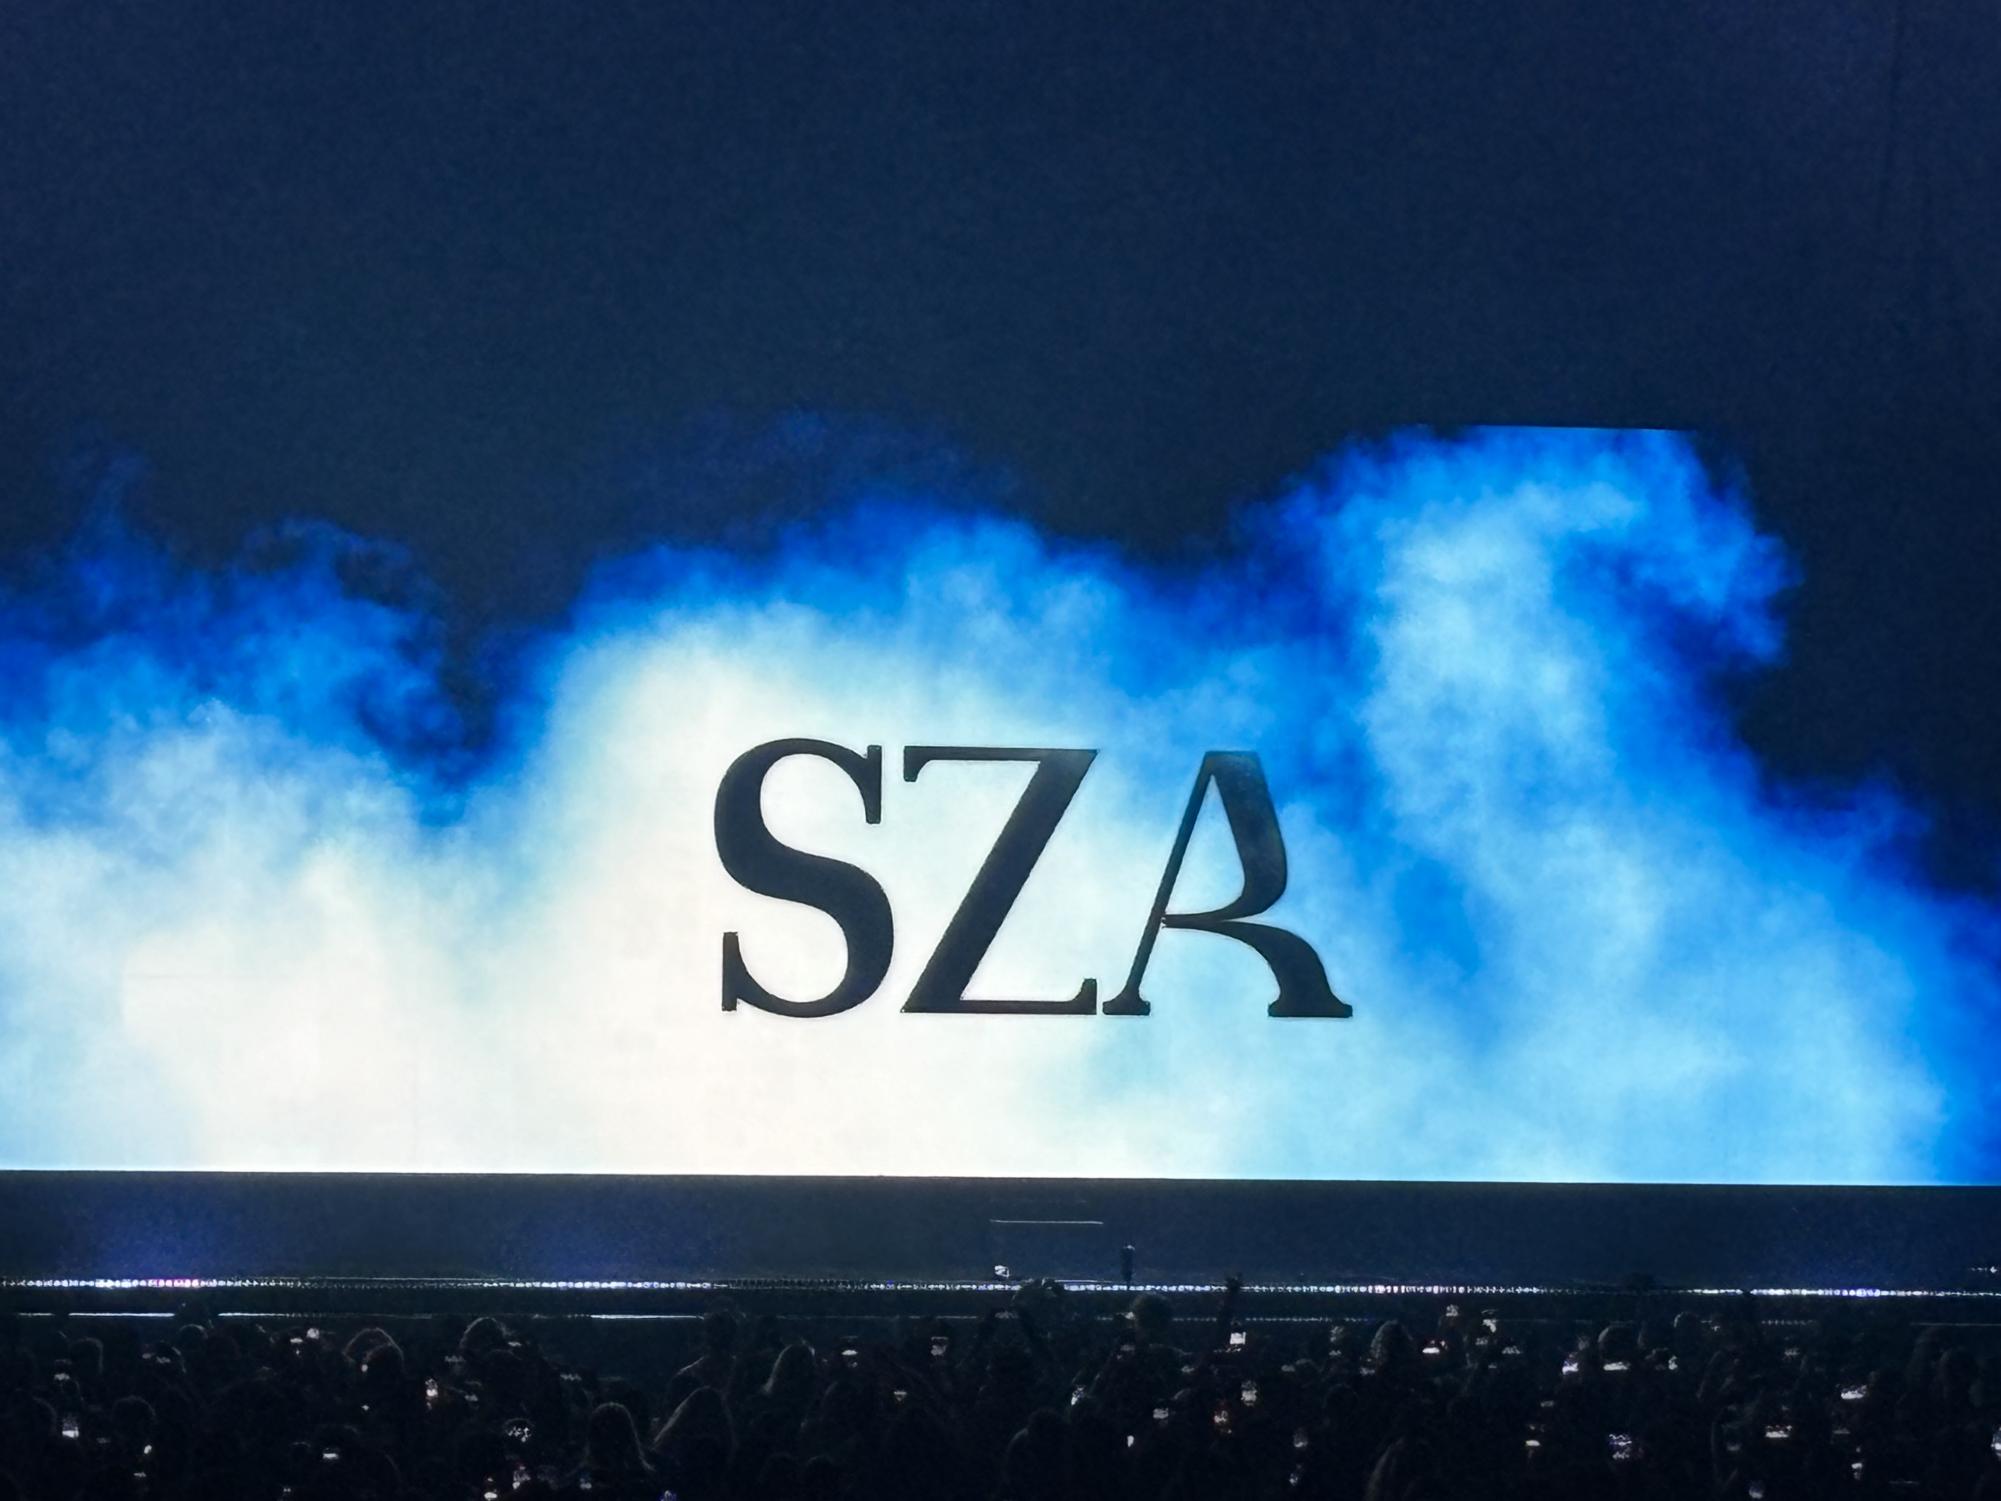 The opening shots of the Oct. 23, 2023, show at Crypto.com Arena just moments before SZA takes the stage.